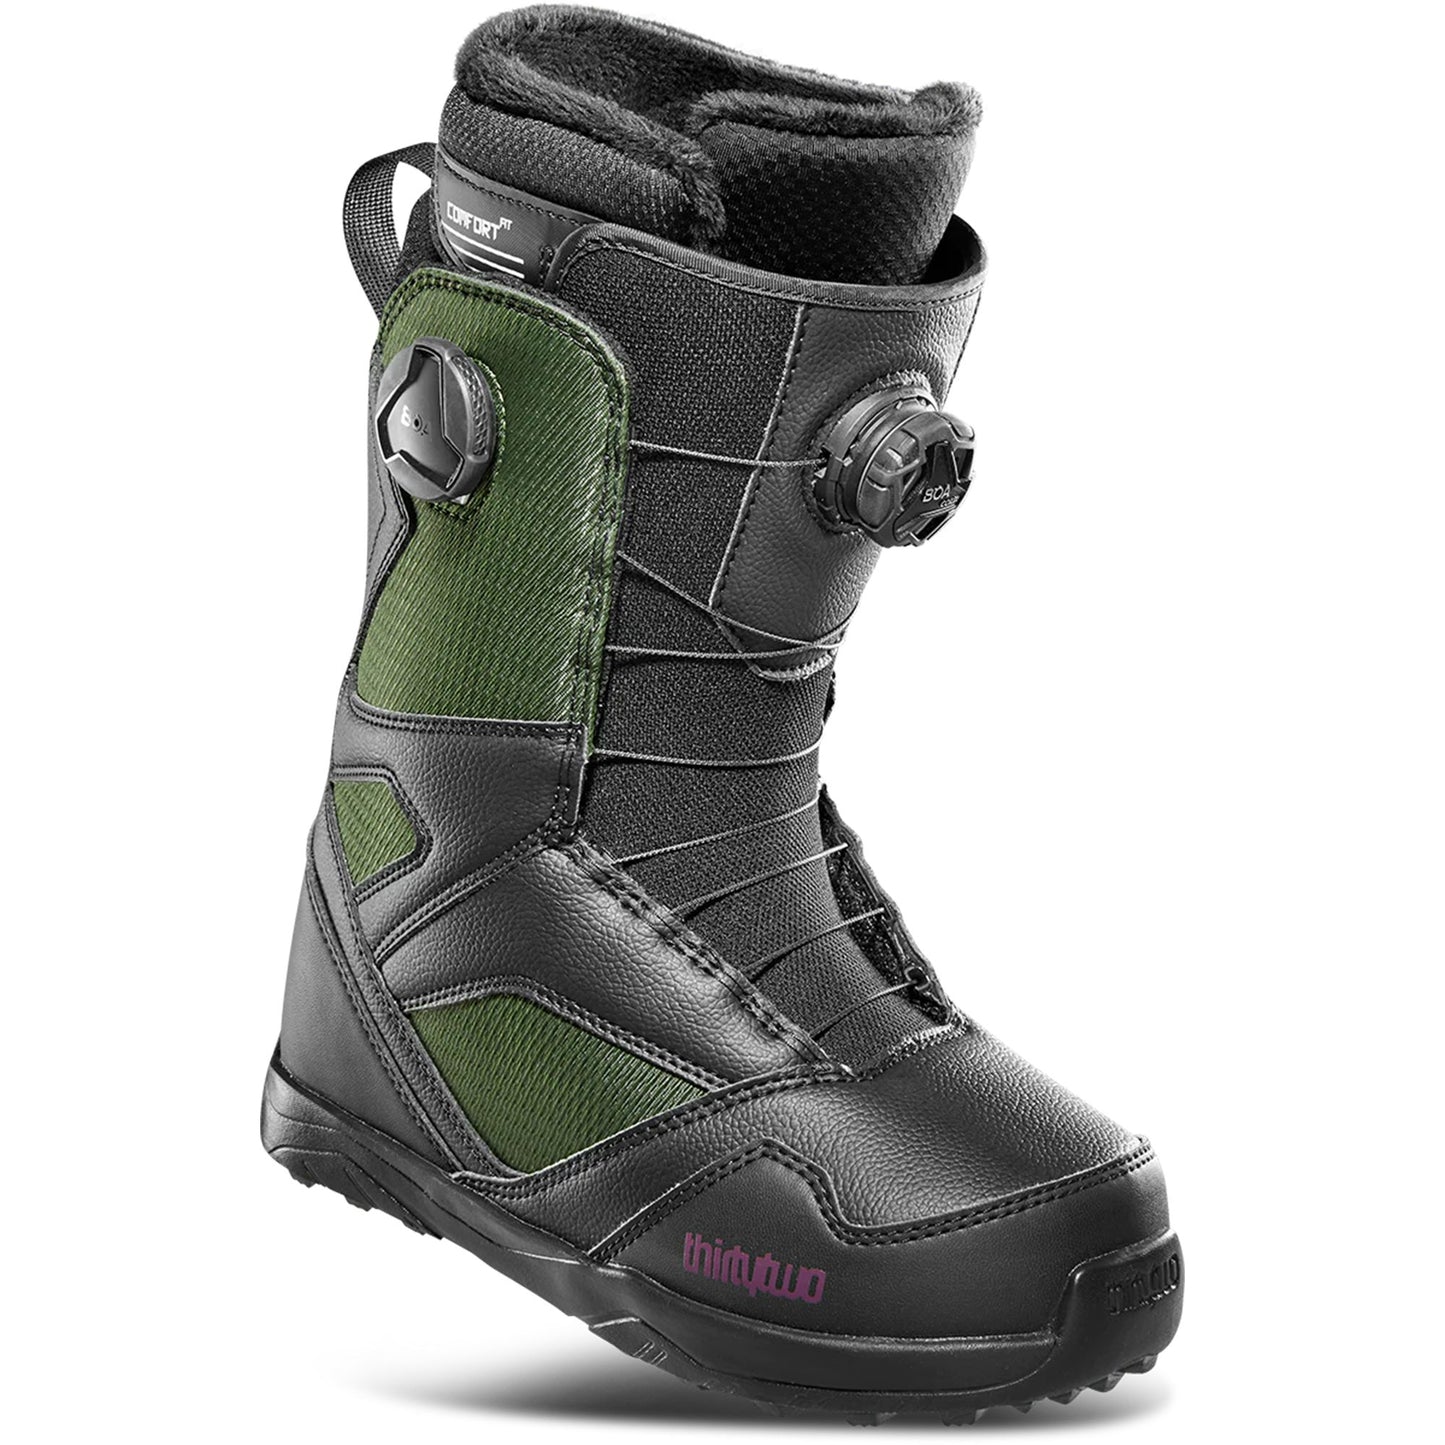 ThirtyTwo Women's STW Double BOA Snowboard Boots Black Green Snowboard Boots